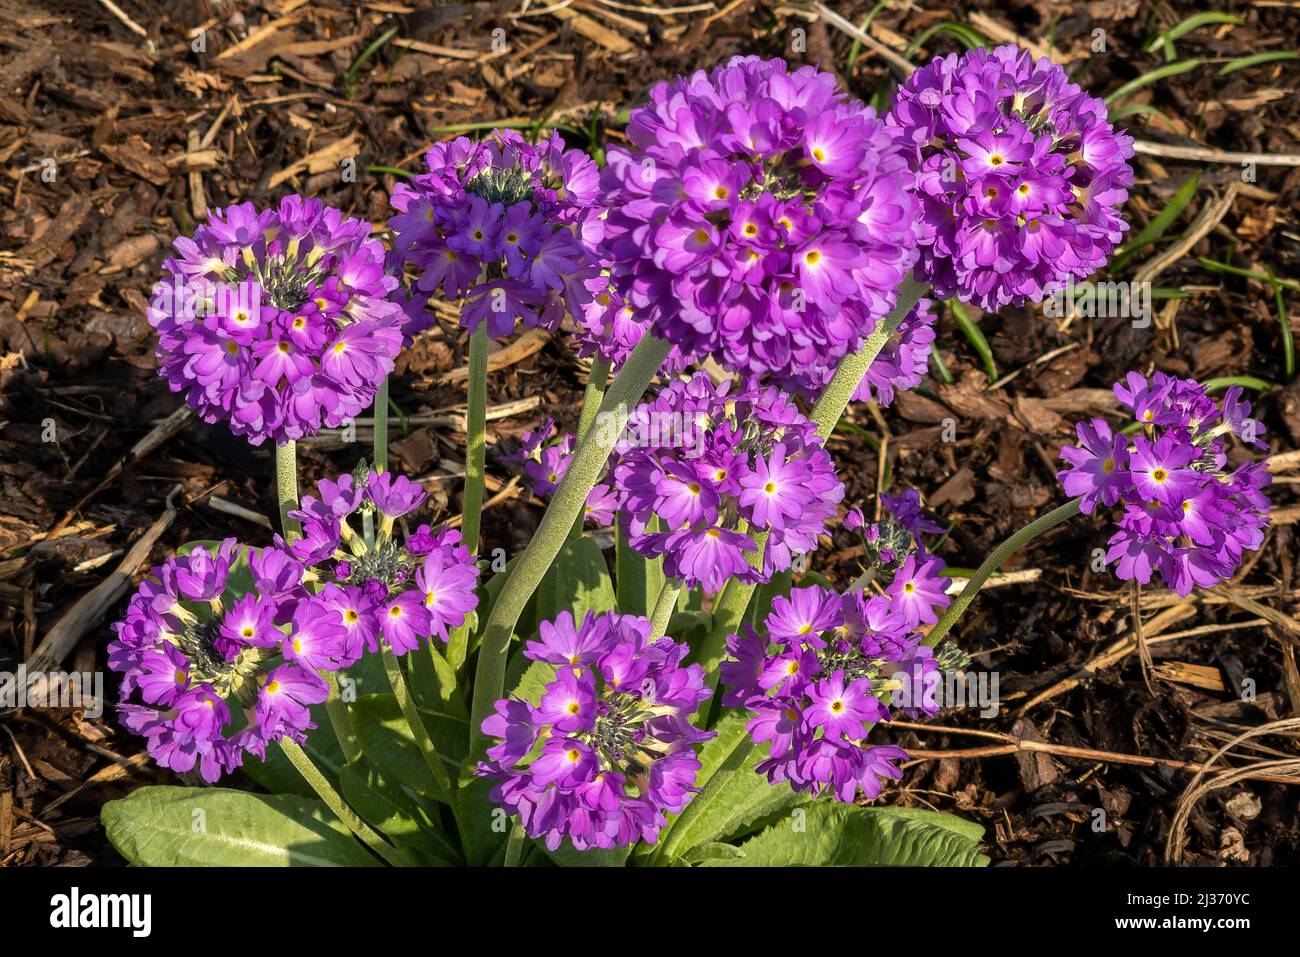 Primula denticulata a spring flowering plant with a purple springtime flower commonly known as  primrose, stock photo image Stock Photo